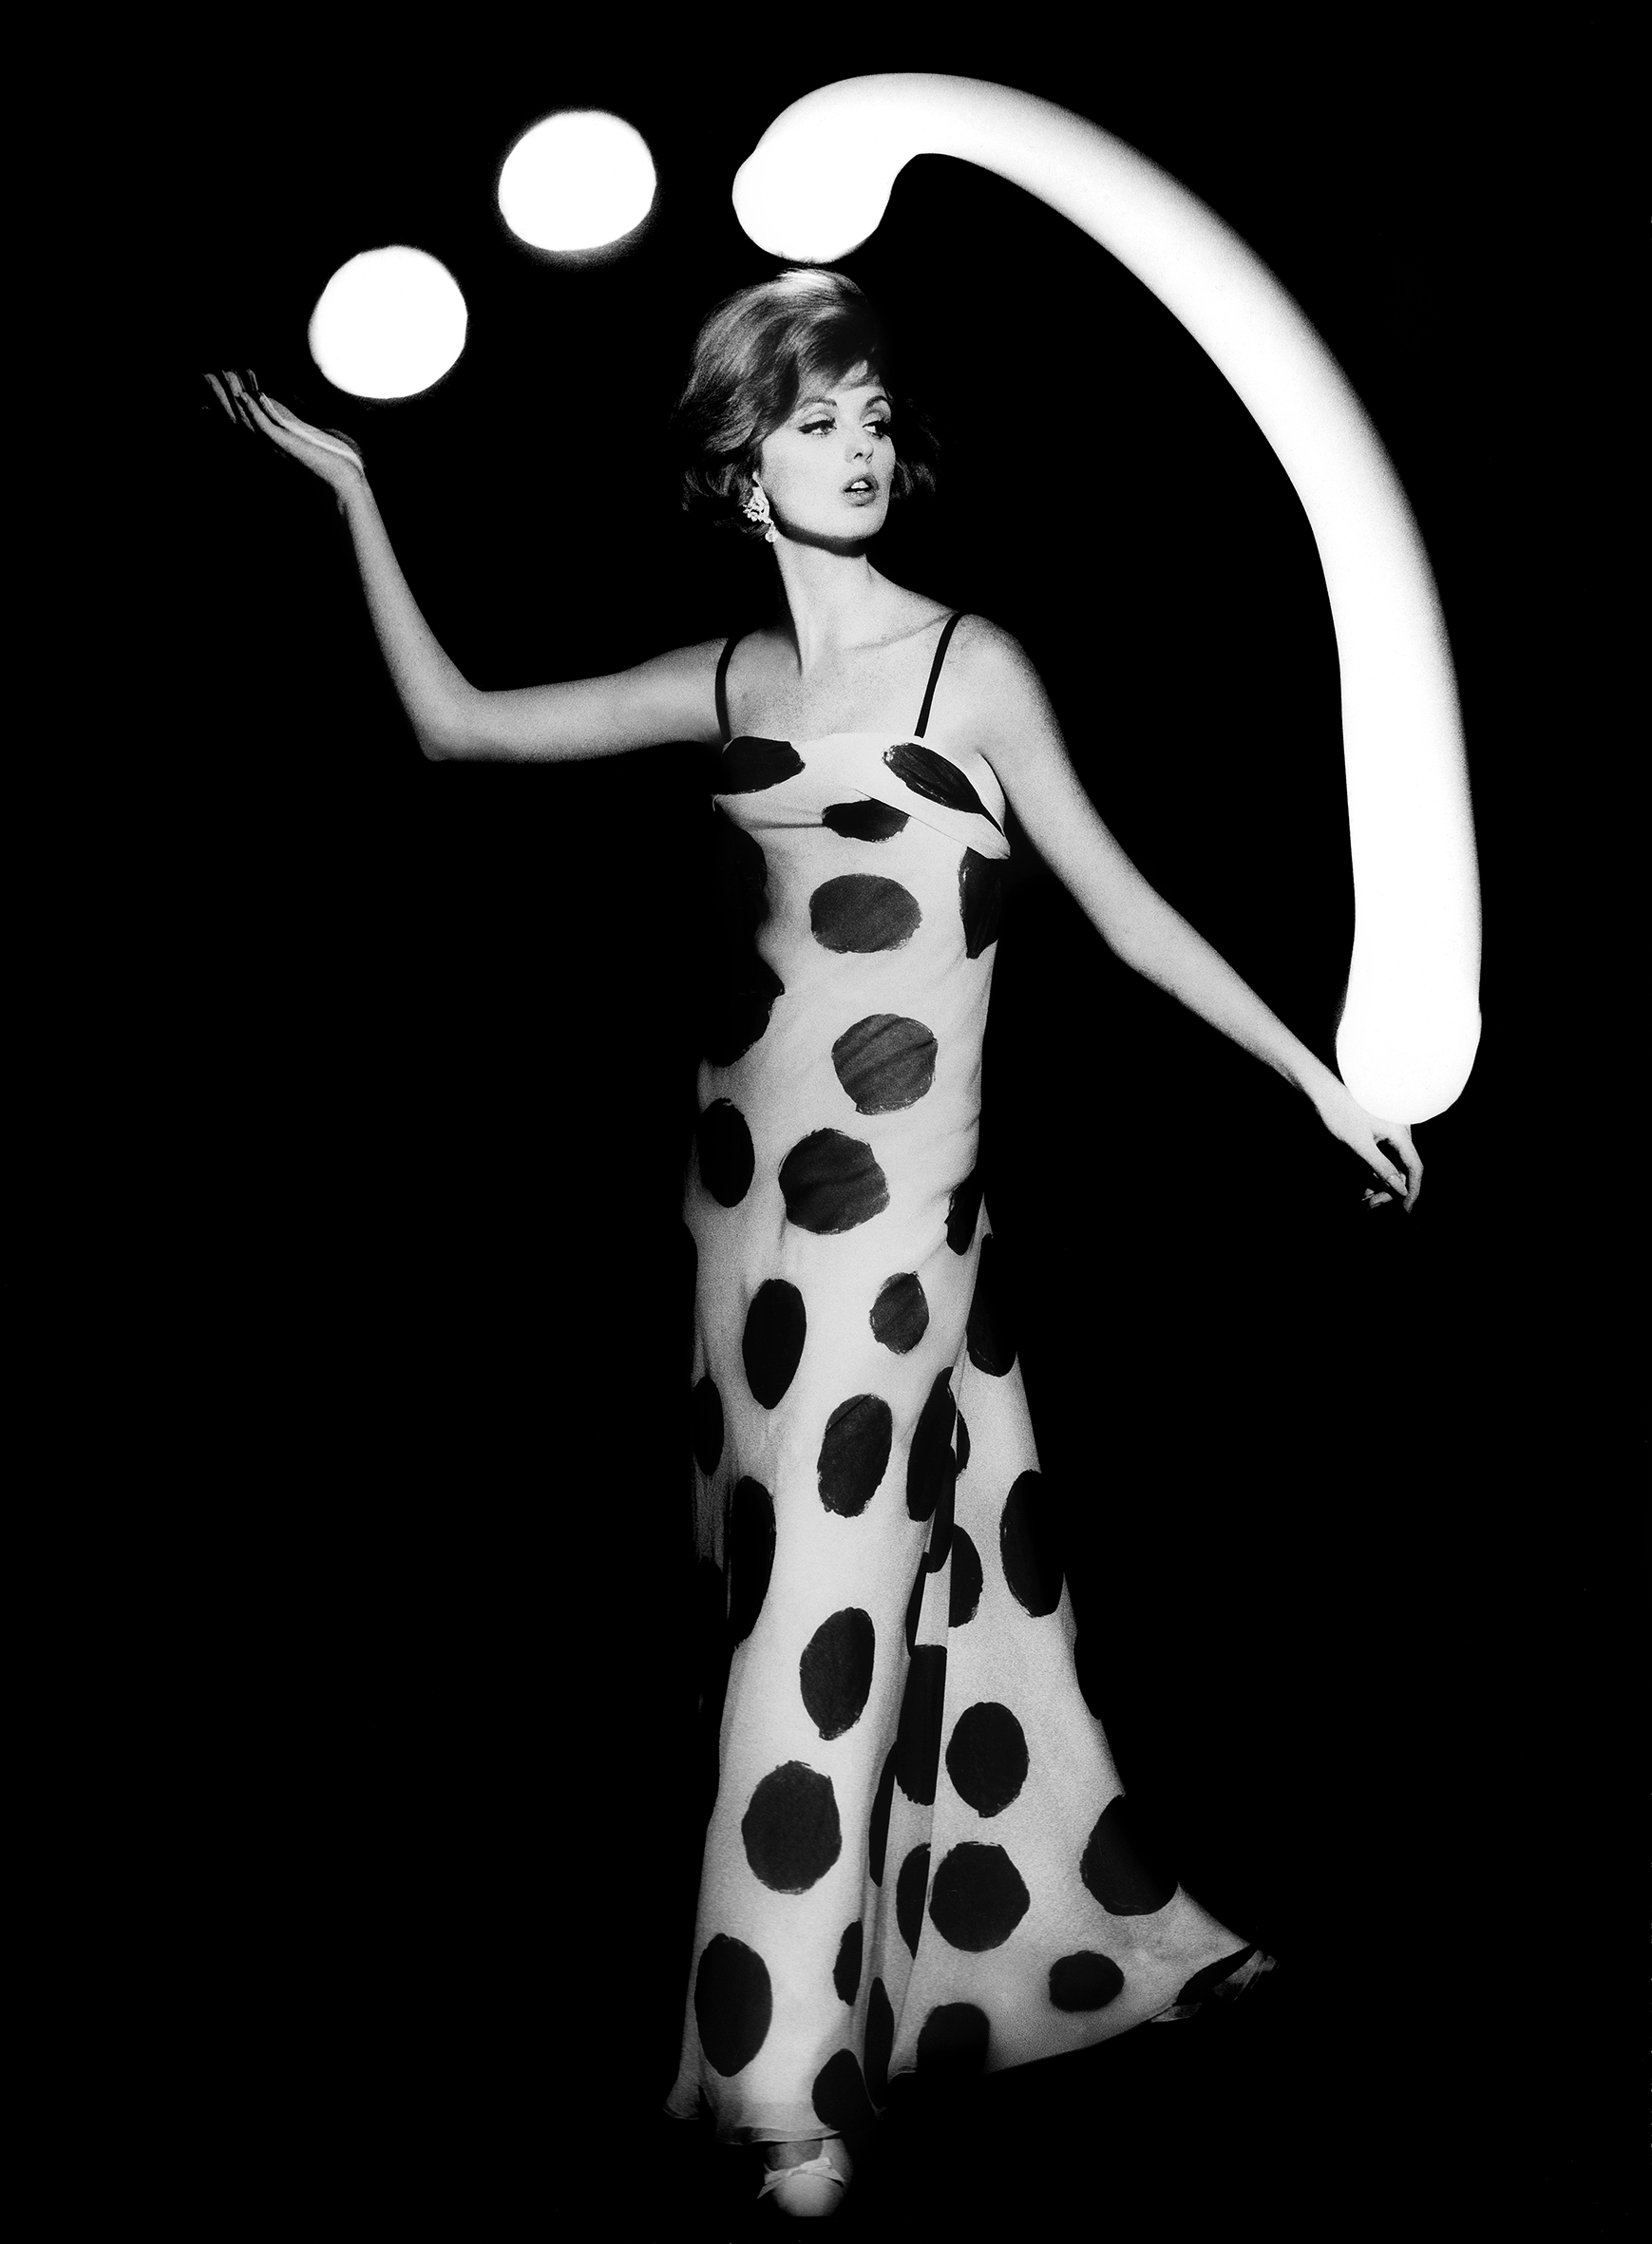 Black-and-white photo of a woman in a polka dot dress juggling white light balls